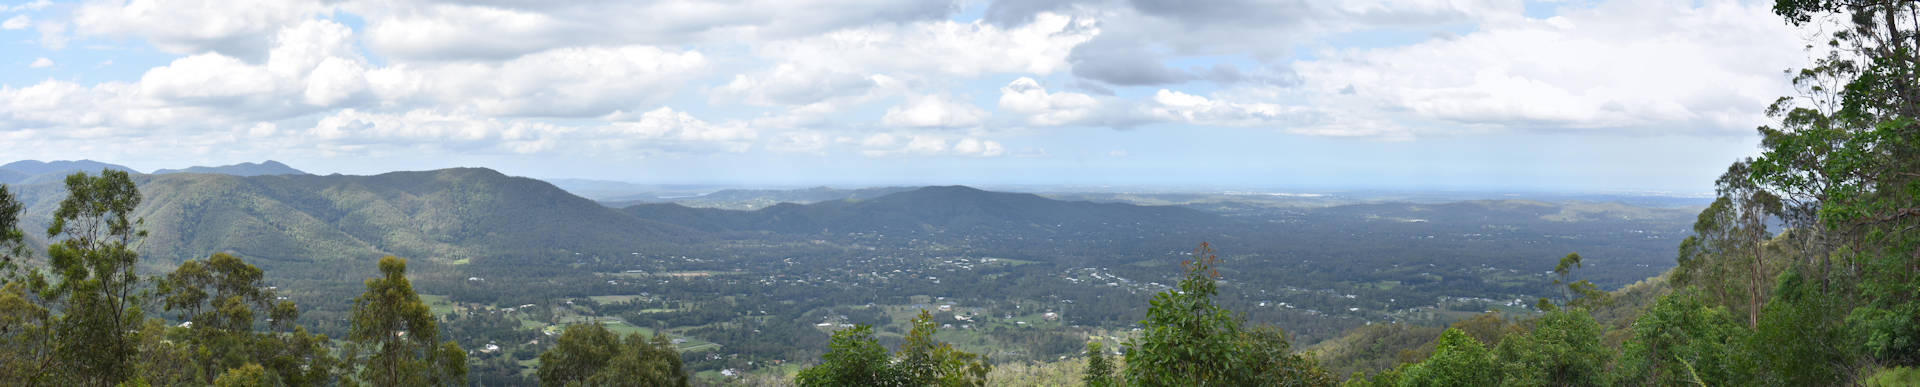 View from Jollys Lookout on the Mt Nebo Tourist Drive